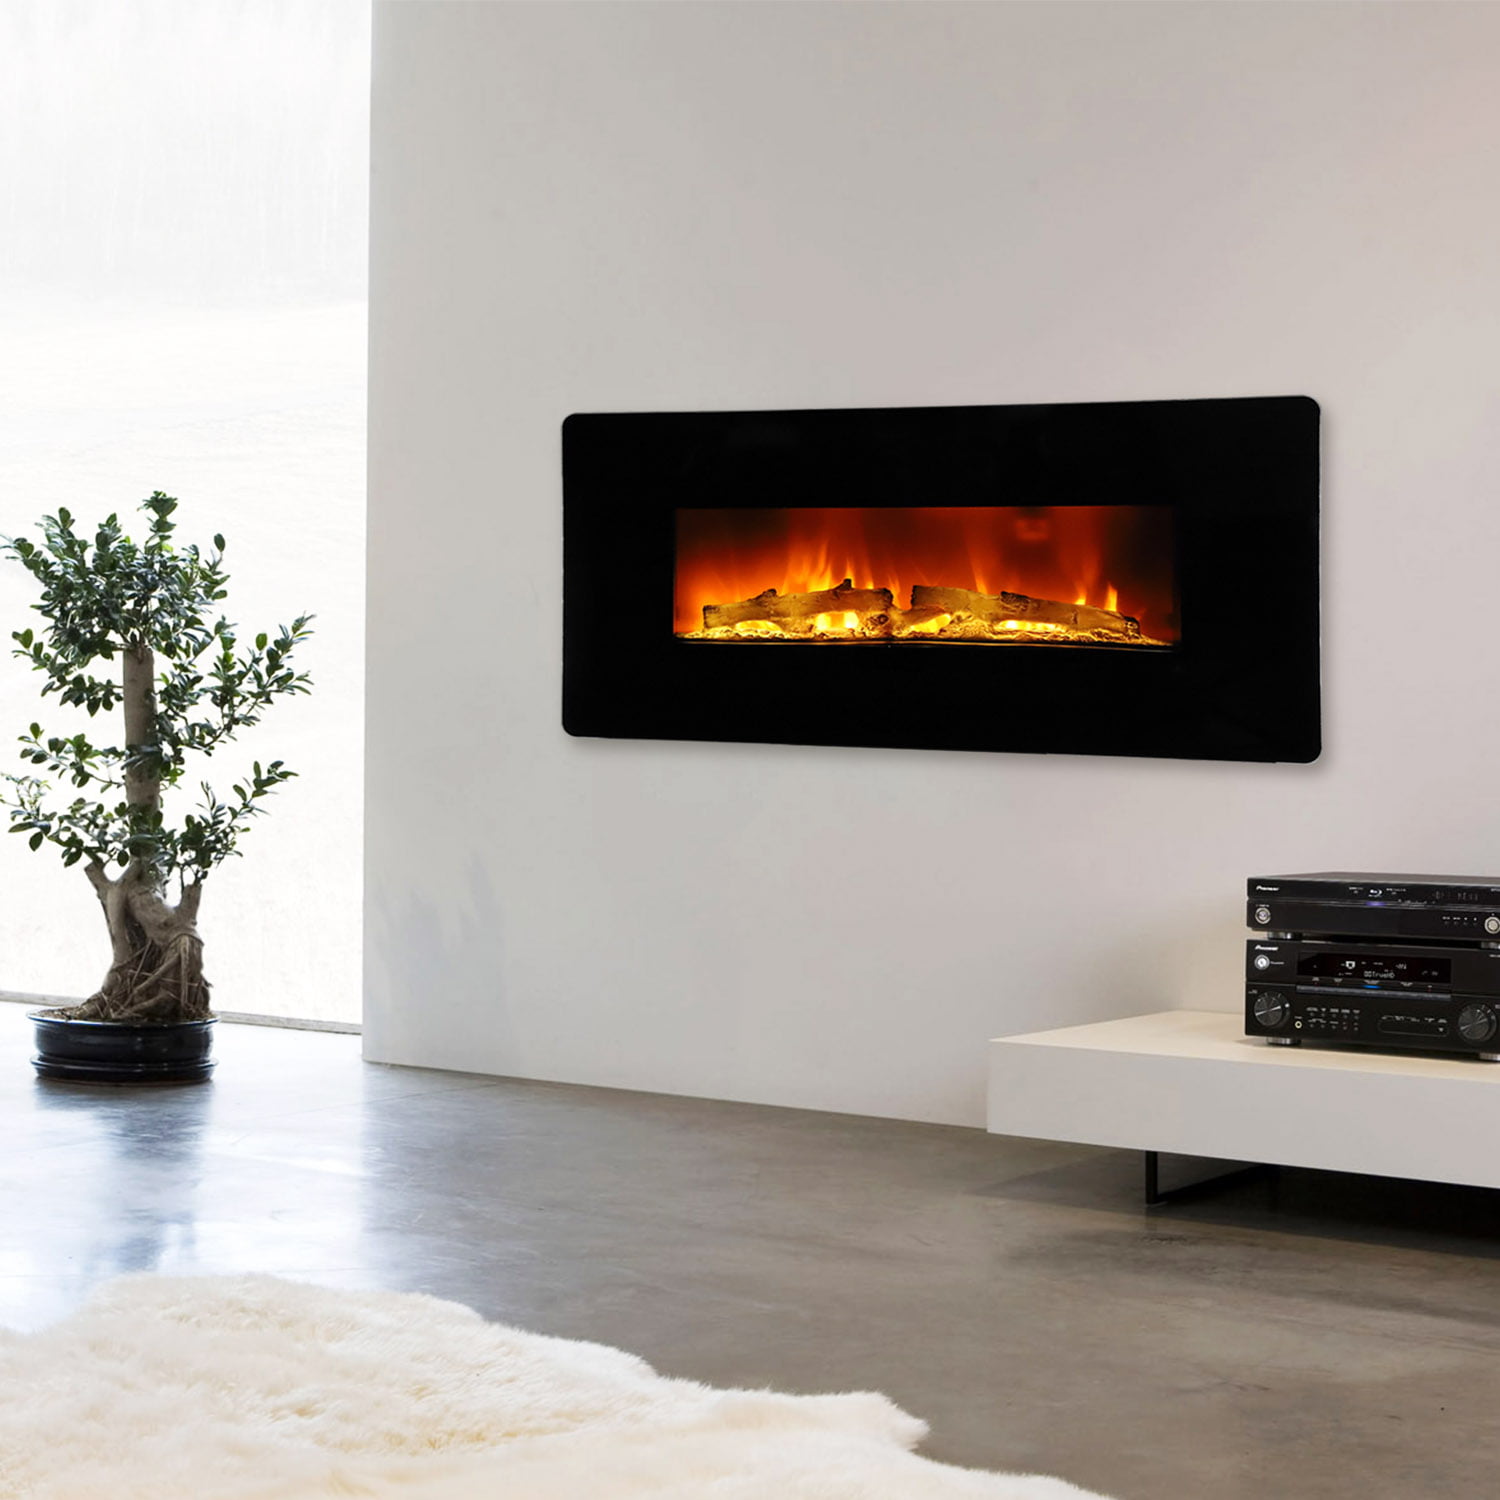 36in 1400W Electric Fireplace, BTMWAY Wall-mounted Fireplaces Heater ...